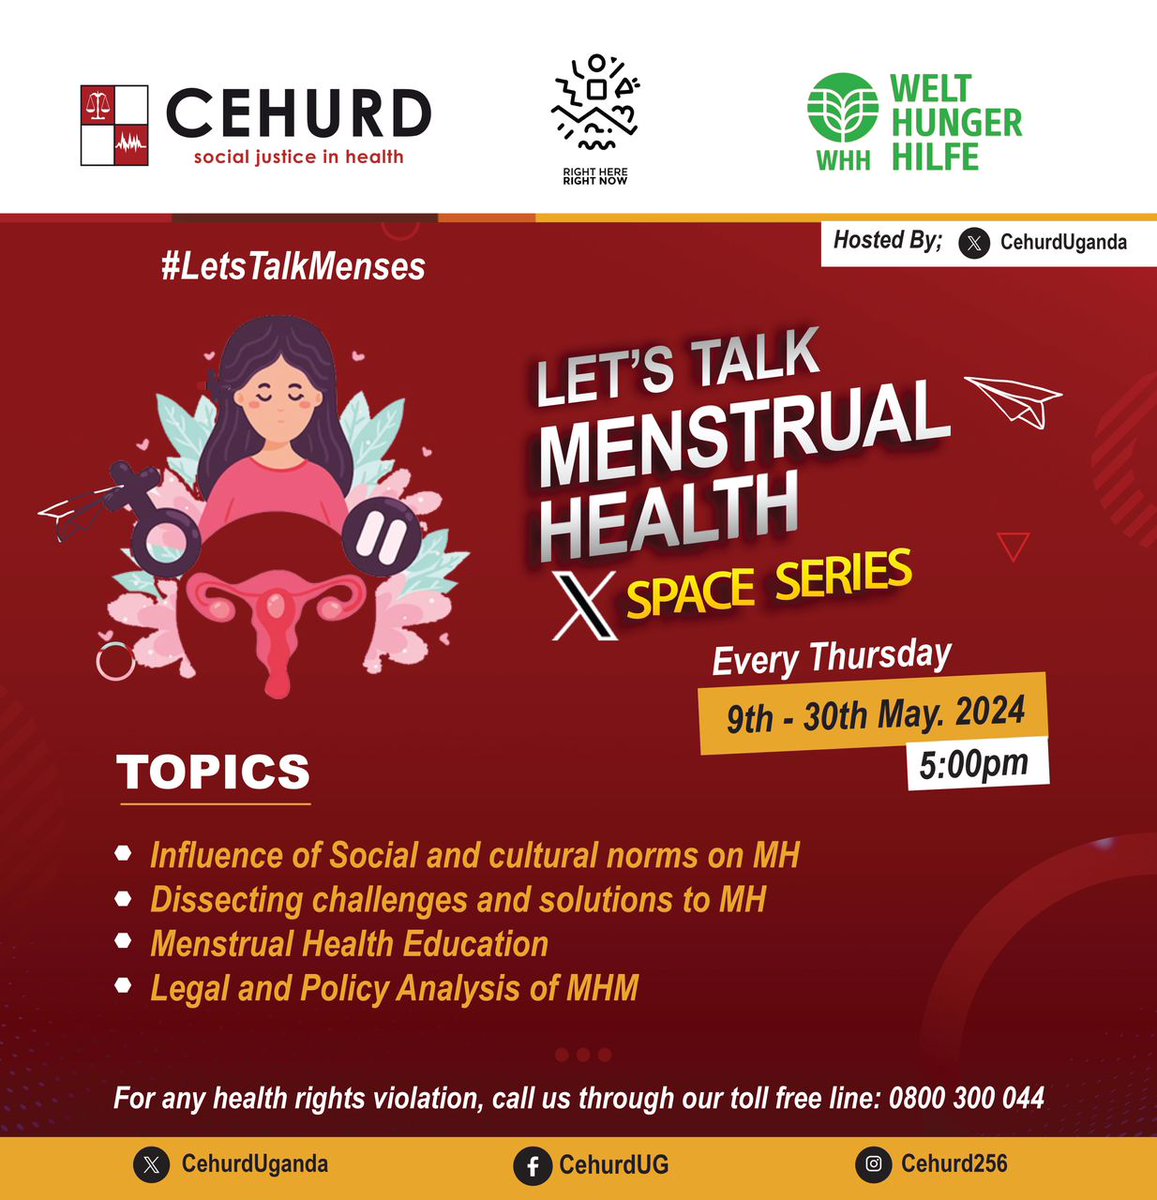 Did you know that 2.3 billion girls and women across the globe face challenges in managing menstruation? Join our X-Spaces series every Thursday throughout the month of May; 𝐋𝐞𝐭 𝐮𝐬 𝐭𝐚𝐥𝐤 𝐦𝐞𝐧𝐬𝐭𝐫𝐮𝐚𝐥 𝐡𝐲𝐠𝐢𝐞𝐧𝐞 Menstrual hygiene management (MHM) is not just a…